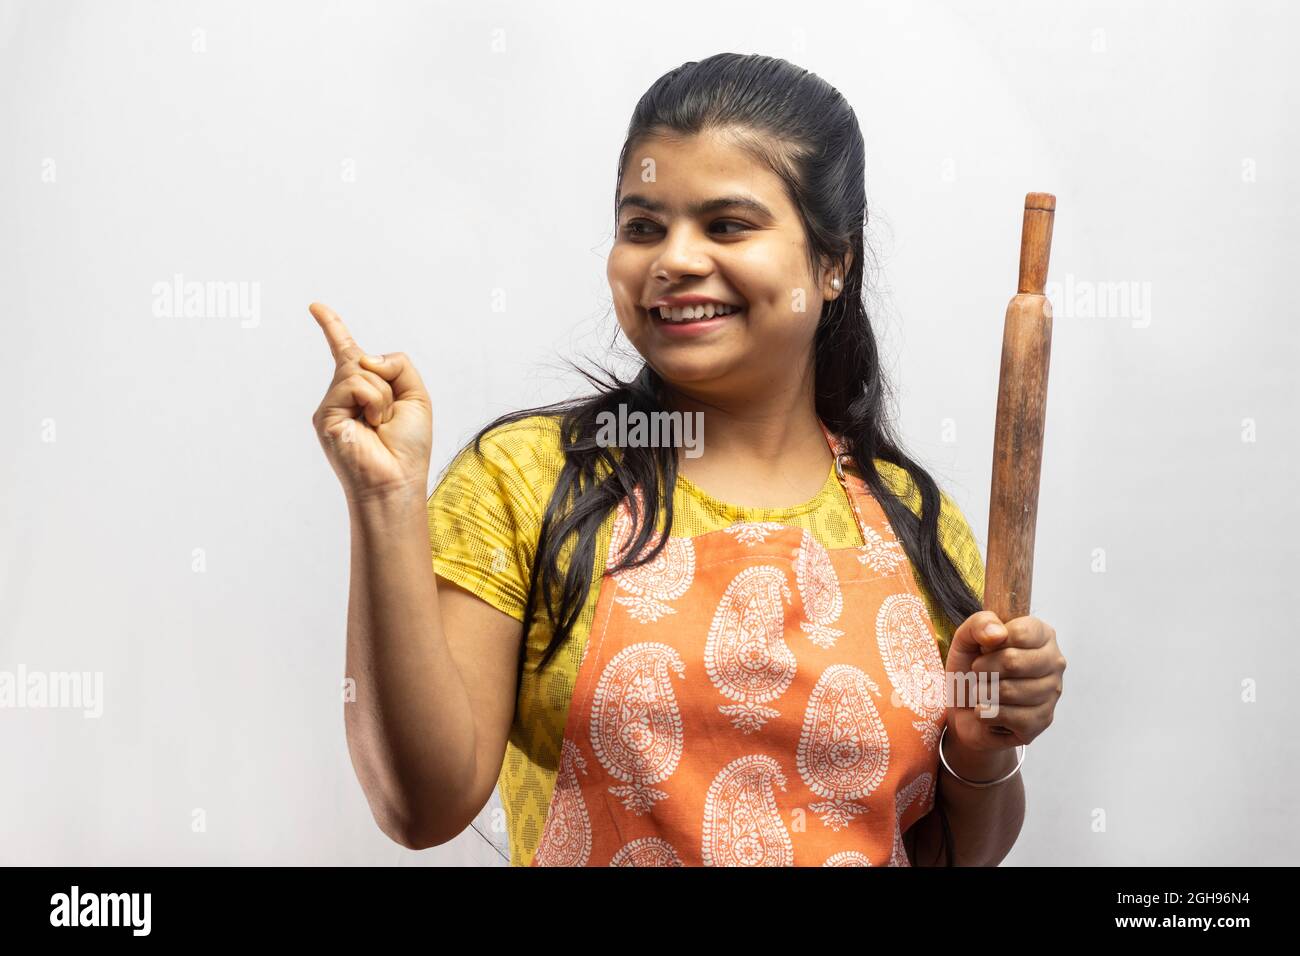 A pretty Indian housewife woman in cooking apron with wooden